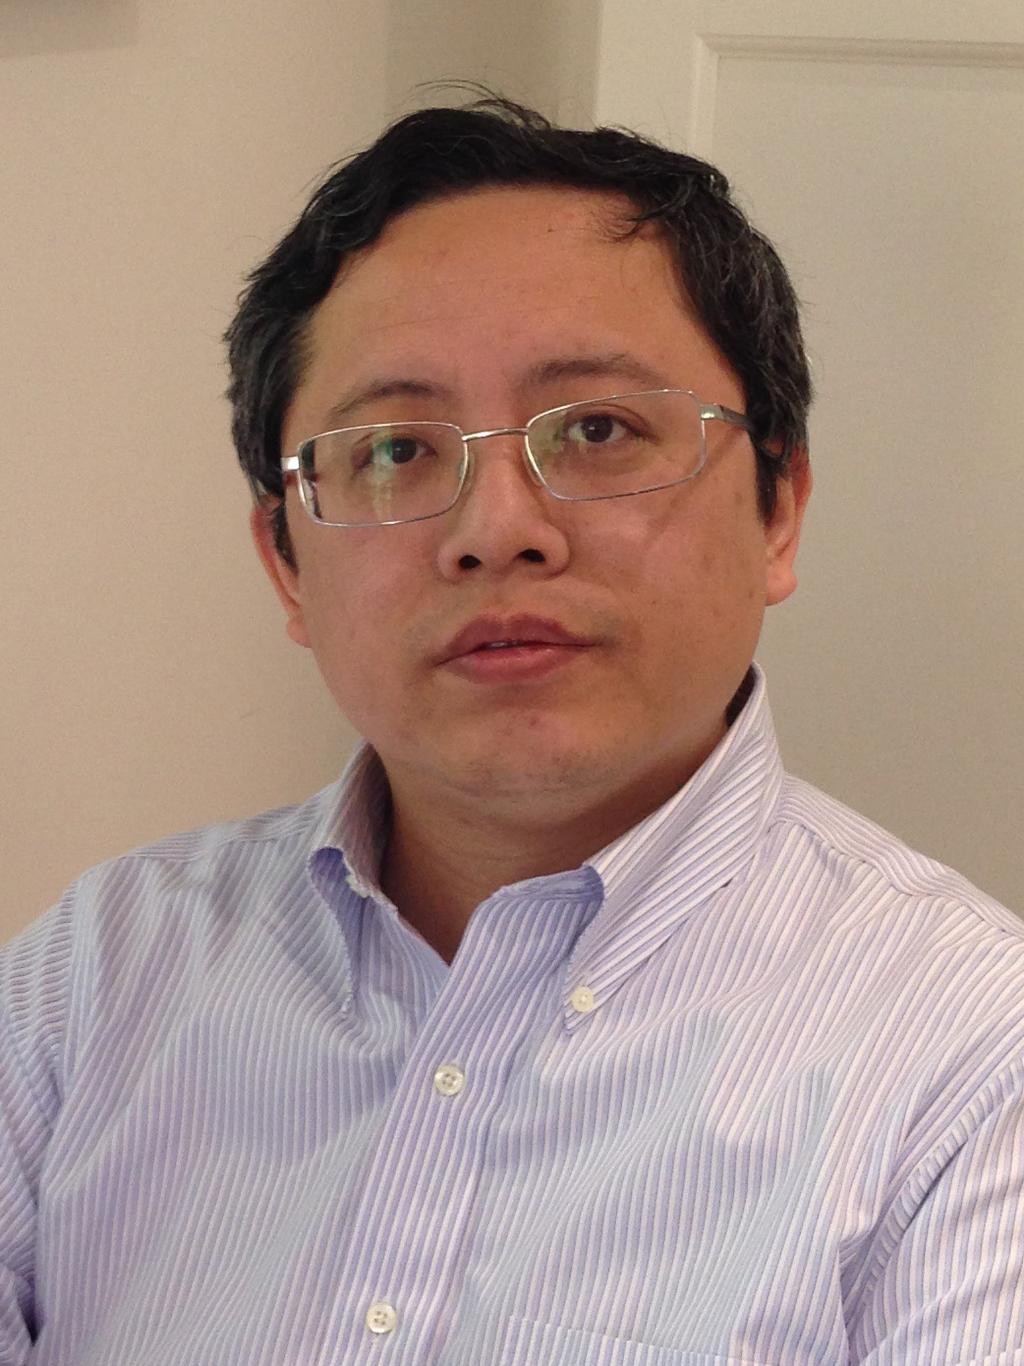 About the Authors Zhaodong Wang obtained his PhD degree in Computer Science from Shanghai Jiao Tong University. He is an expert in high performance system design.